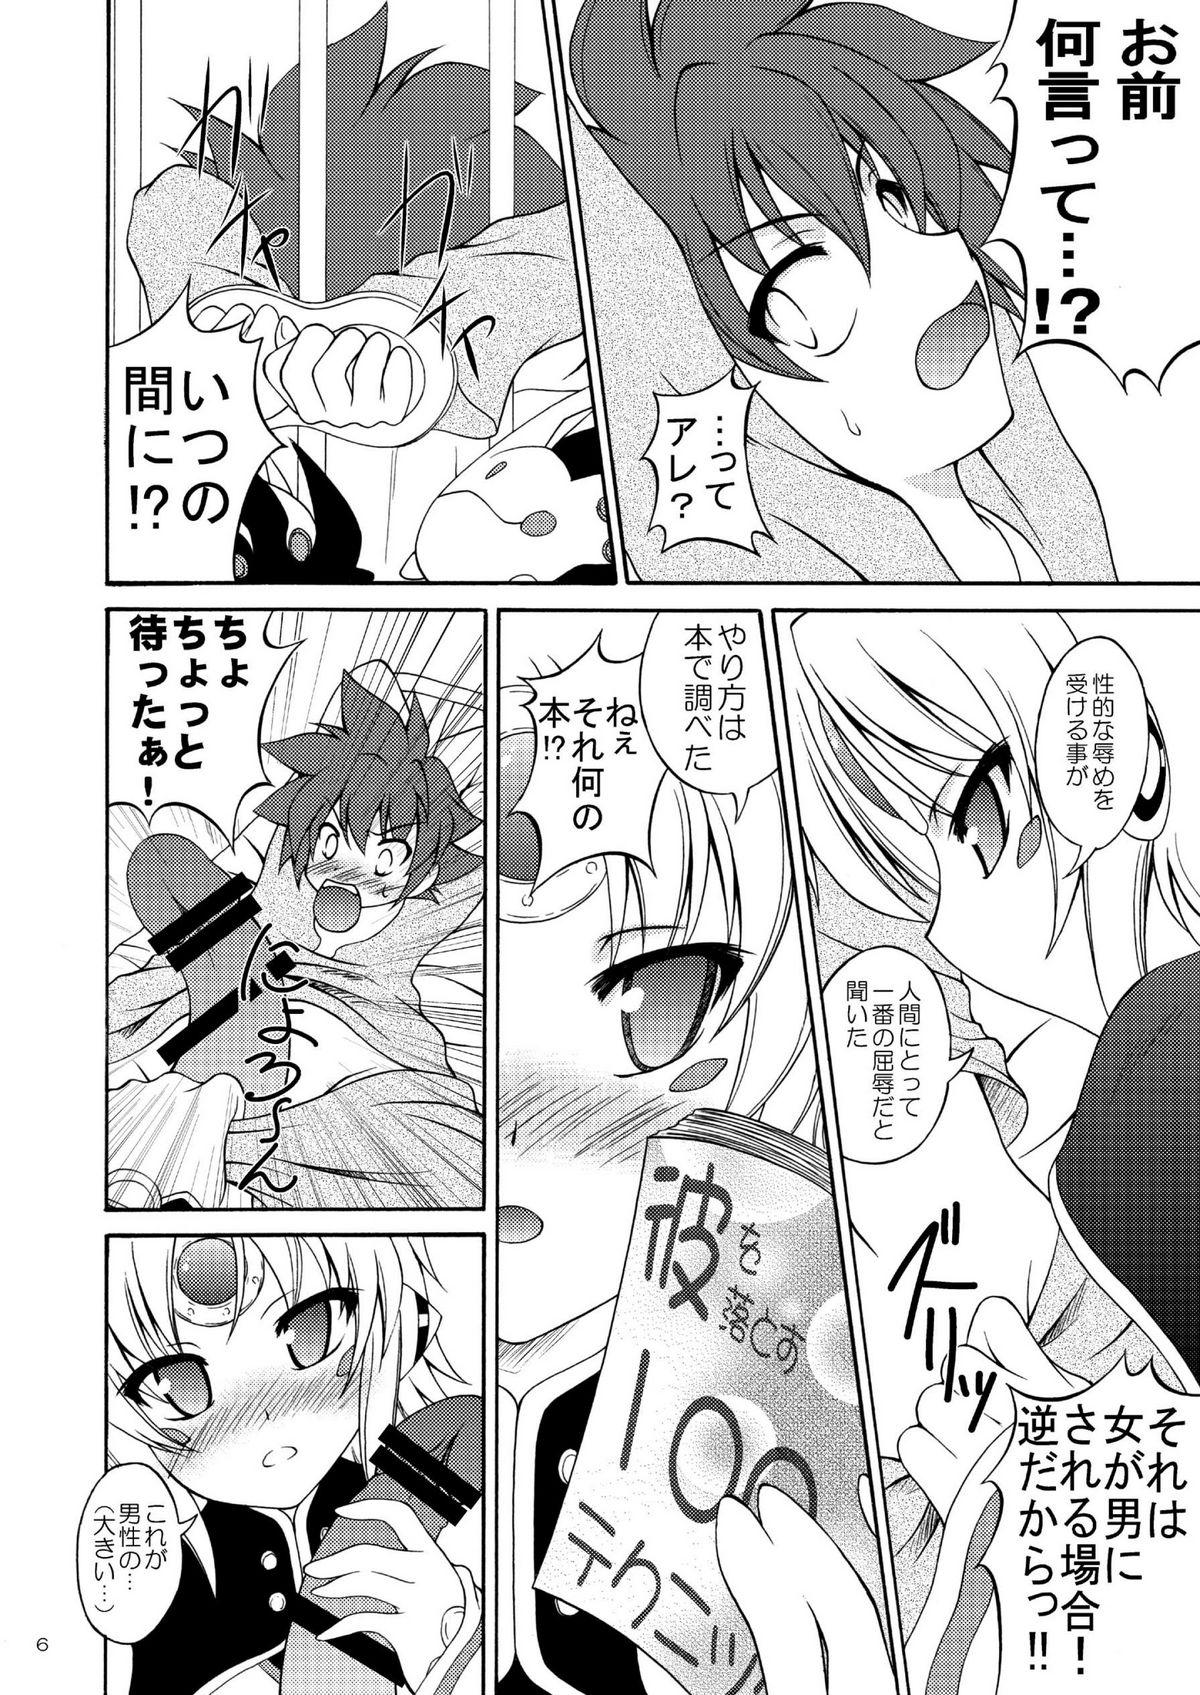 Masseuse E - Elsword Russian - Page 6